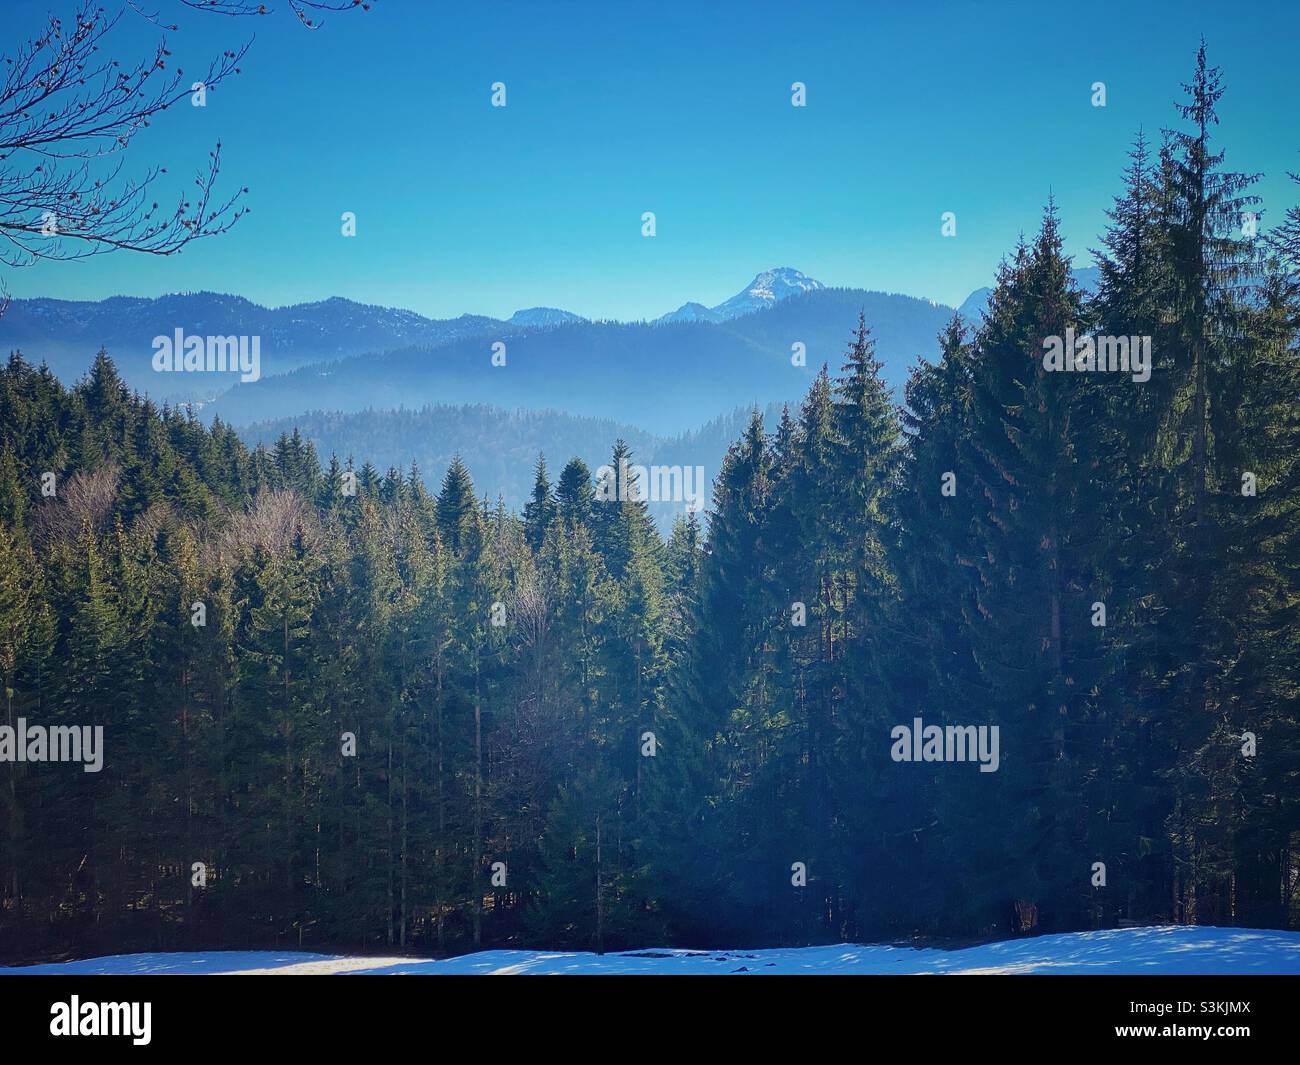 Mountain view with pine trees and melting snow on Brauneck, Germany. Stock Photo